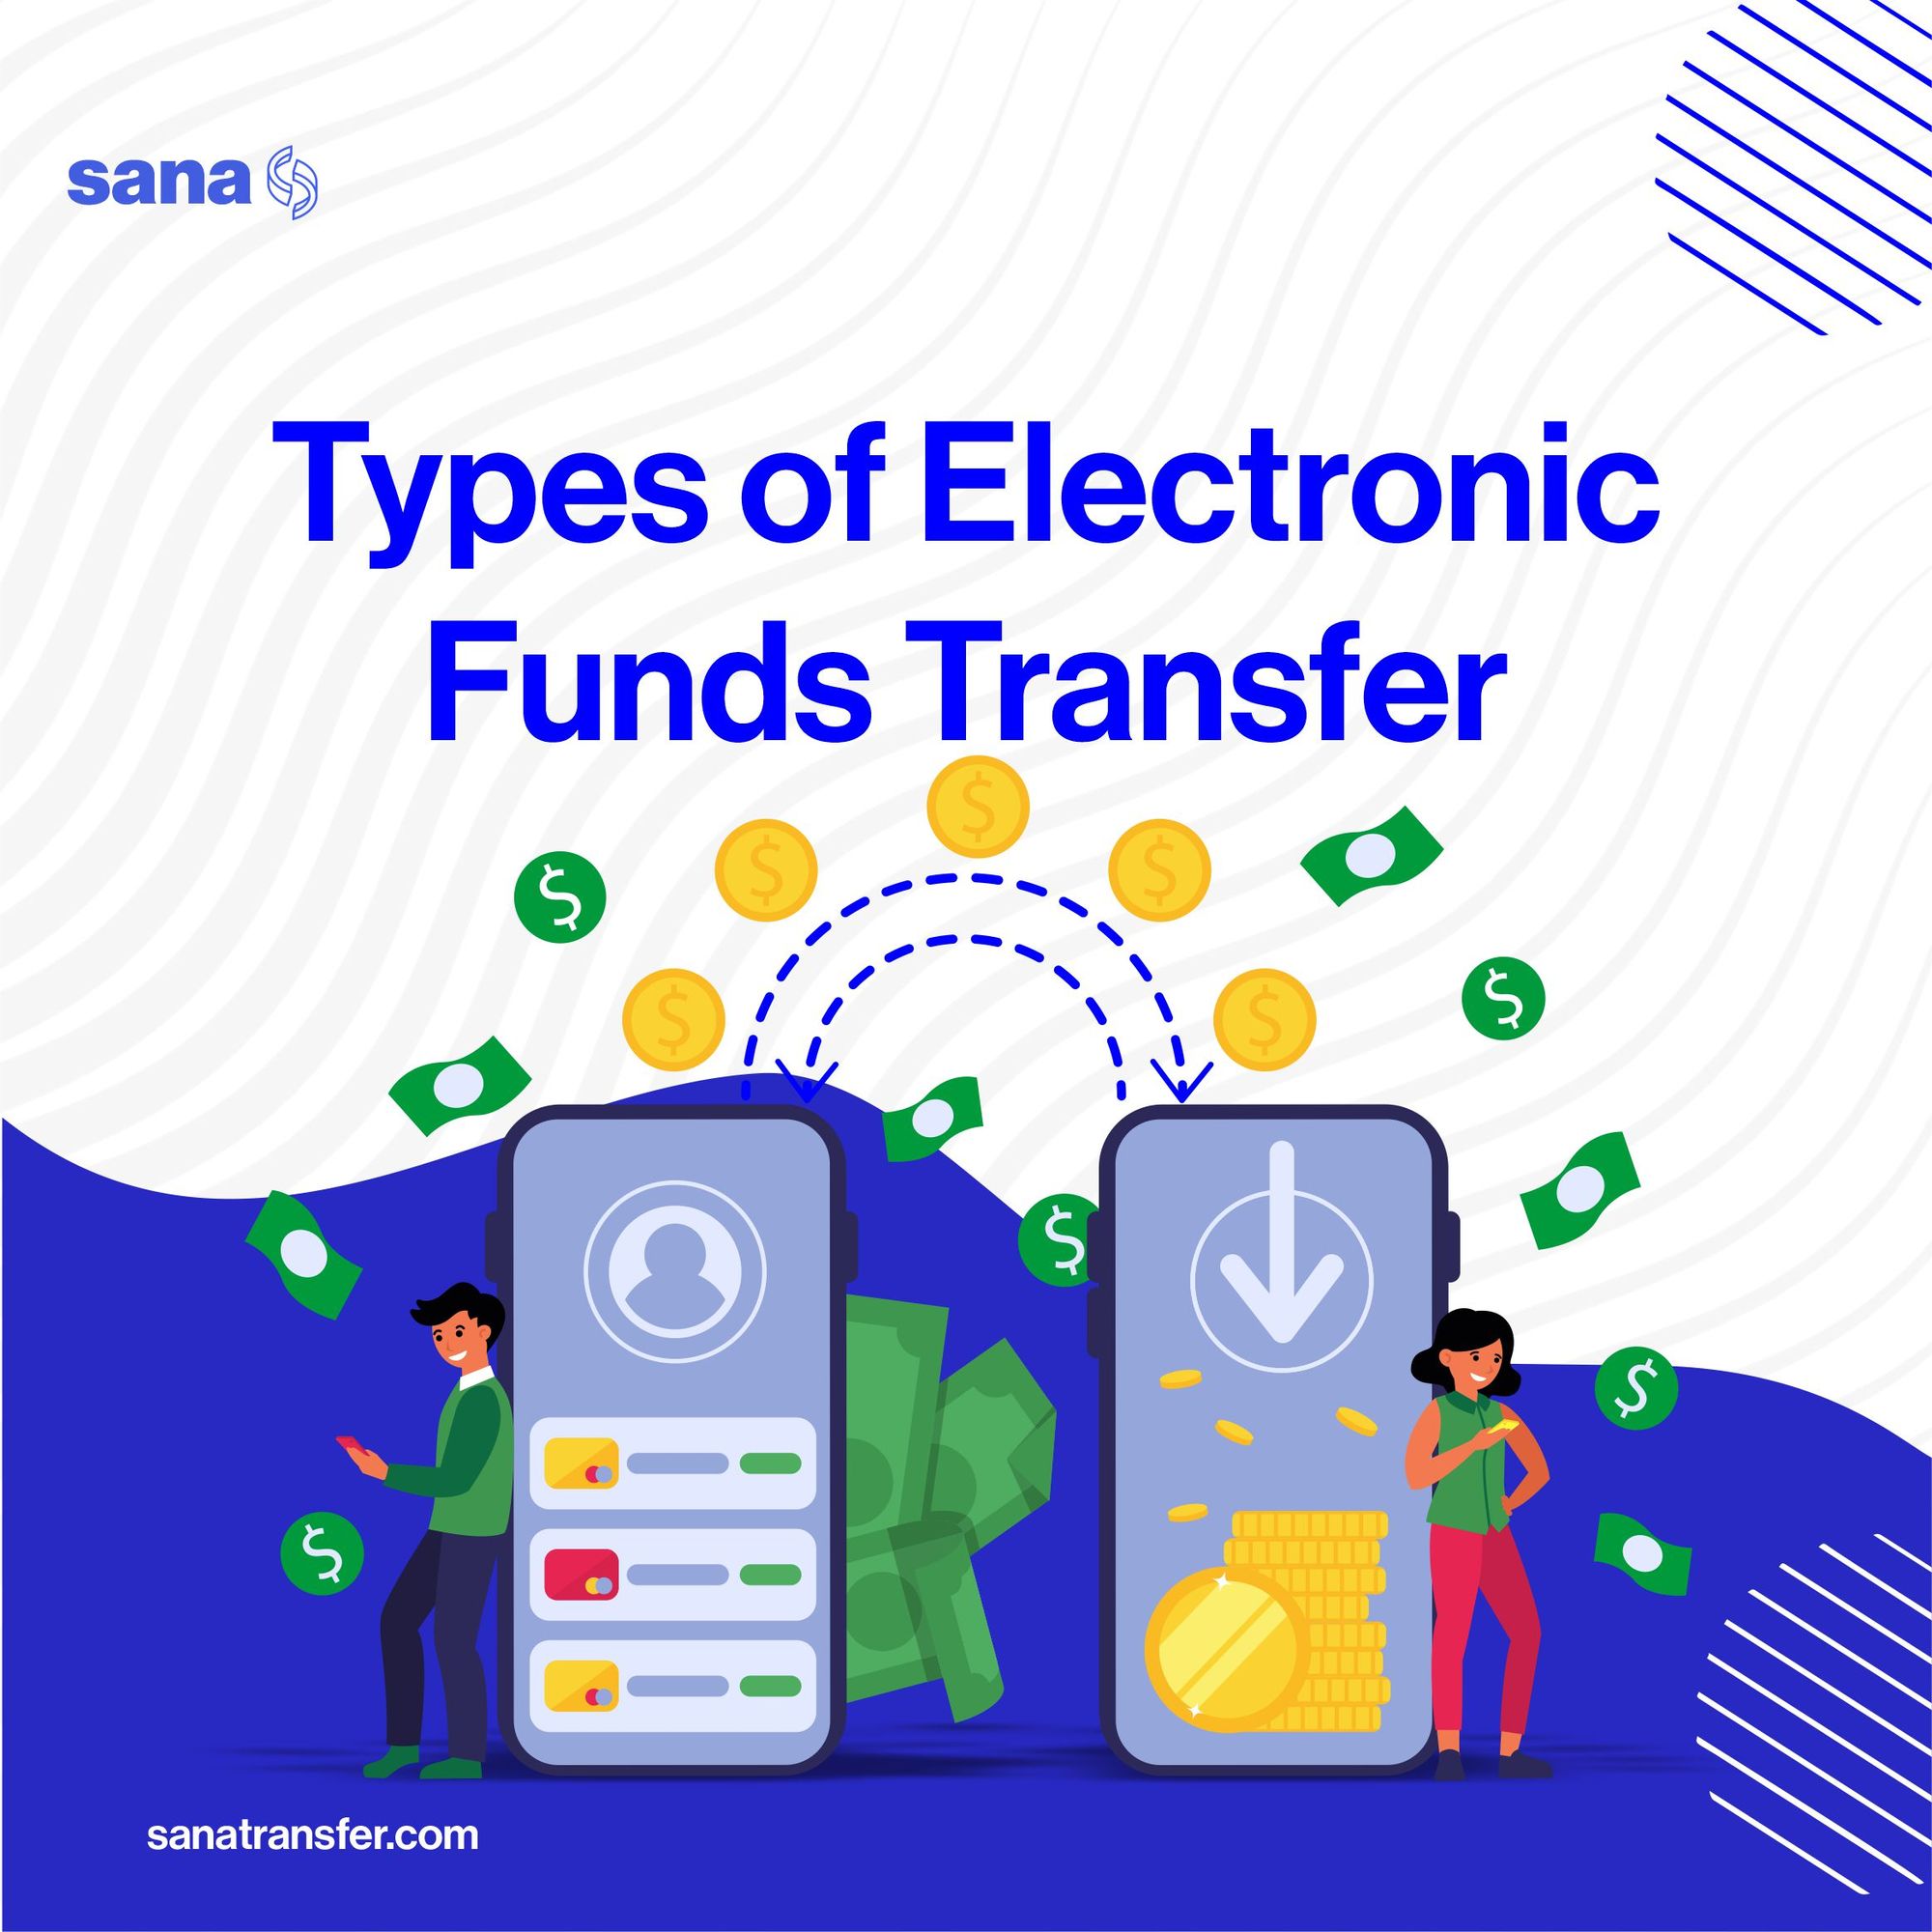 Types of Electronic Funds Transfer (EFT)